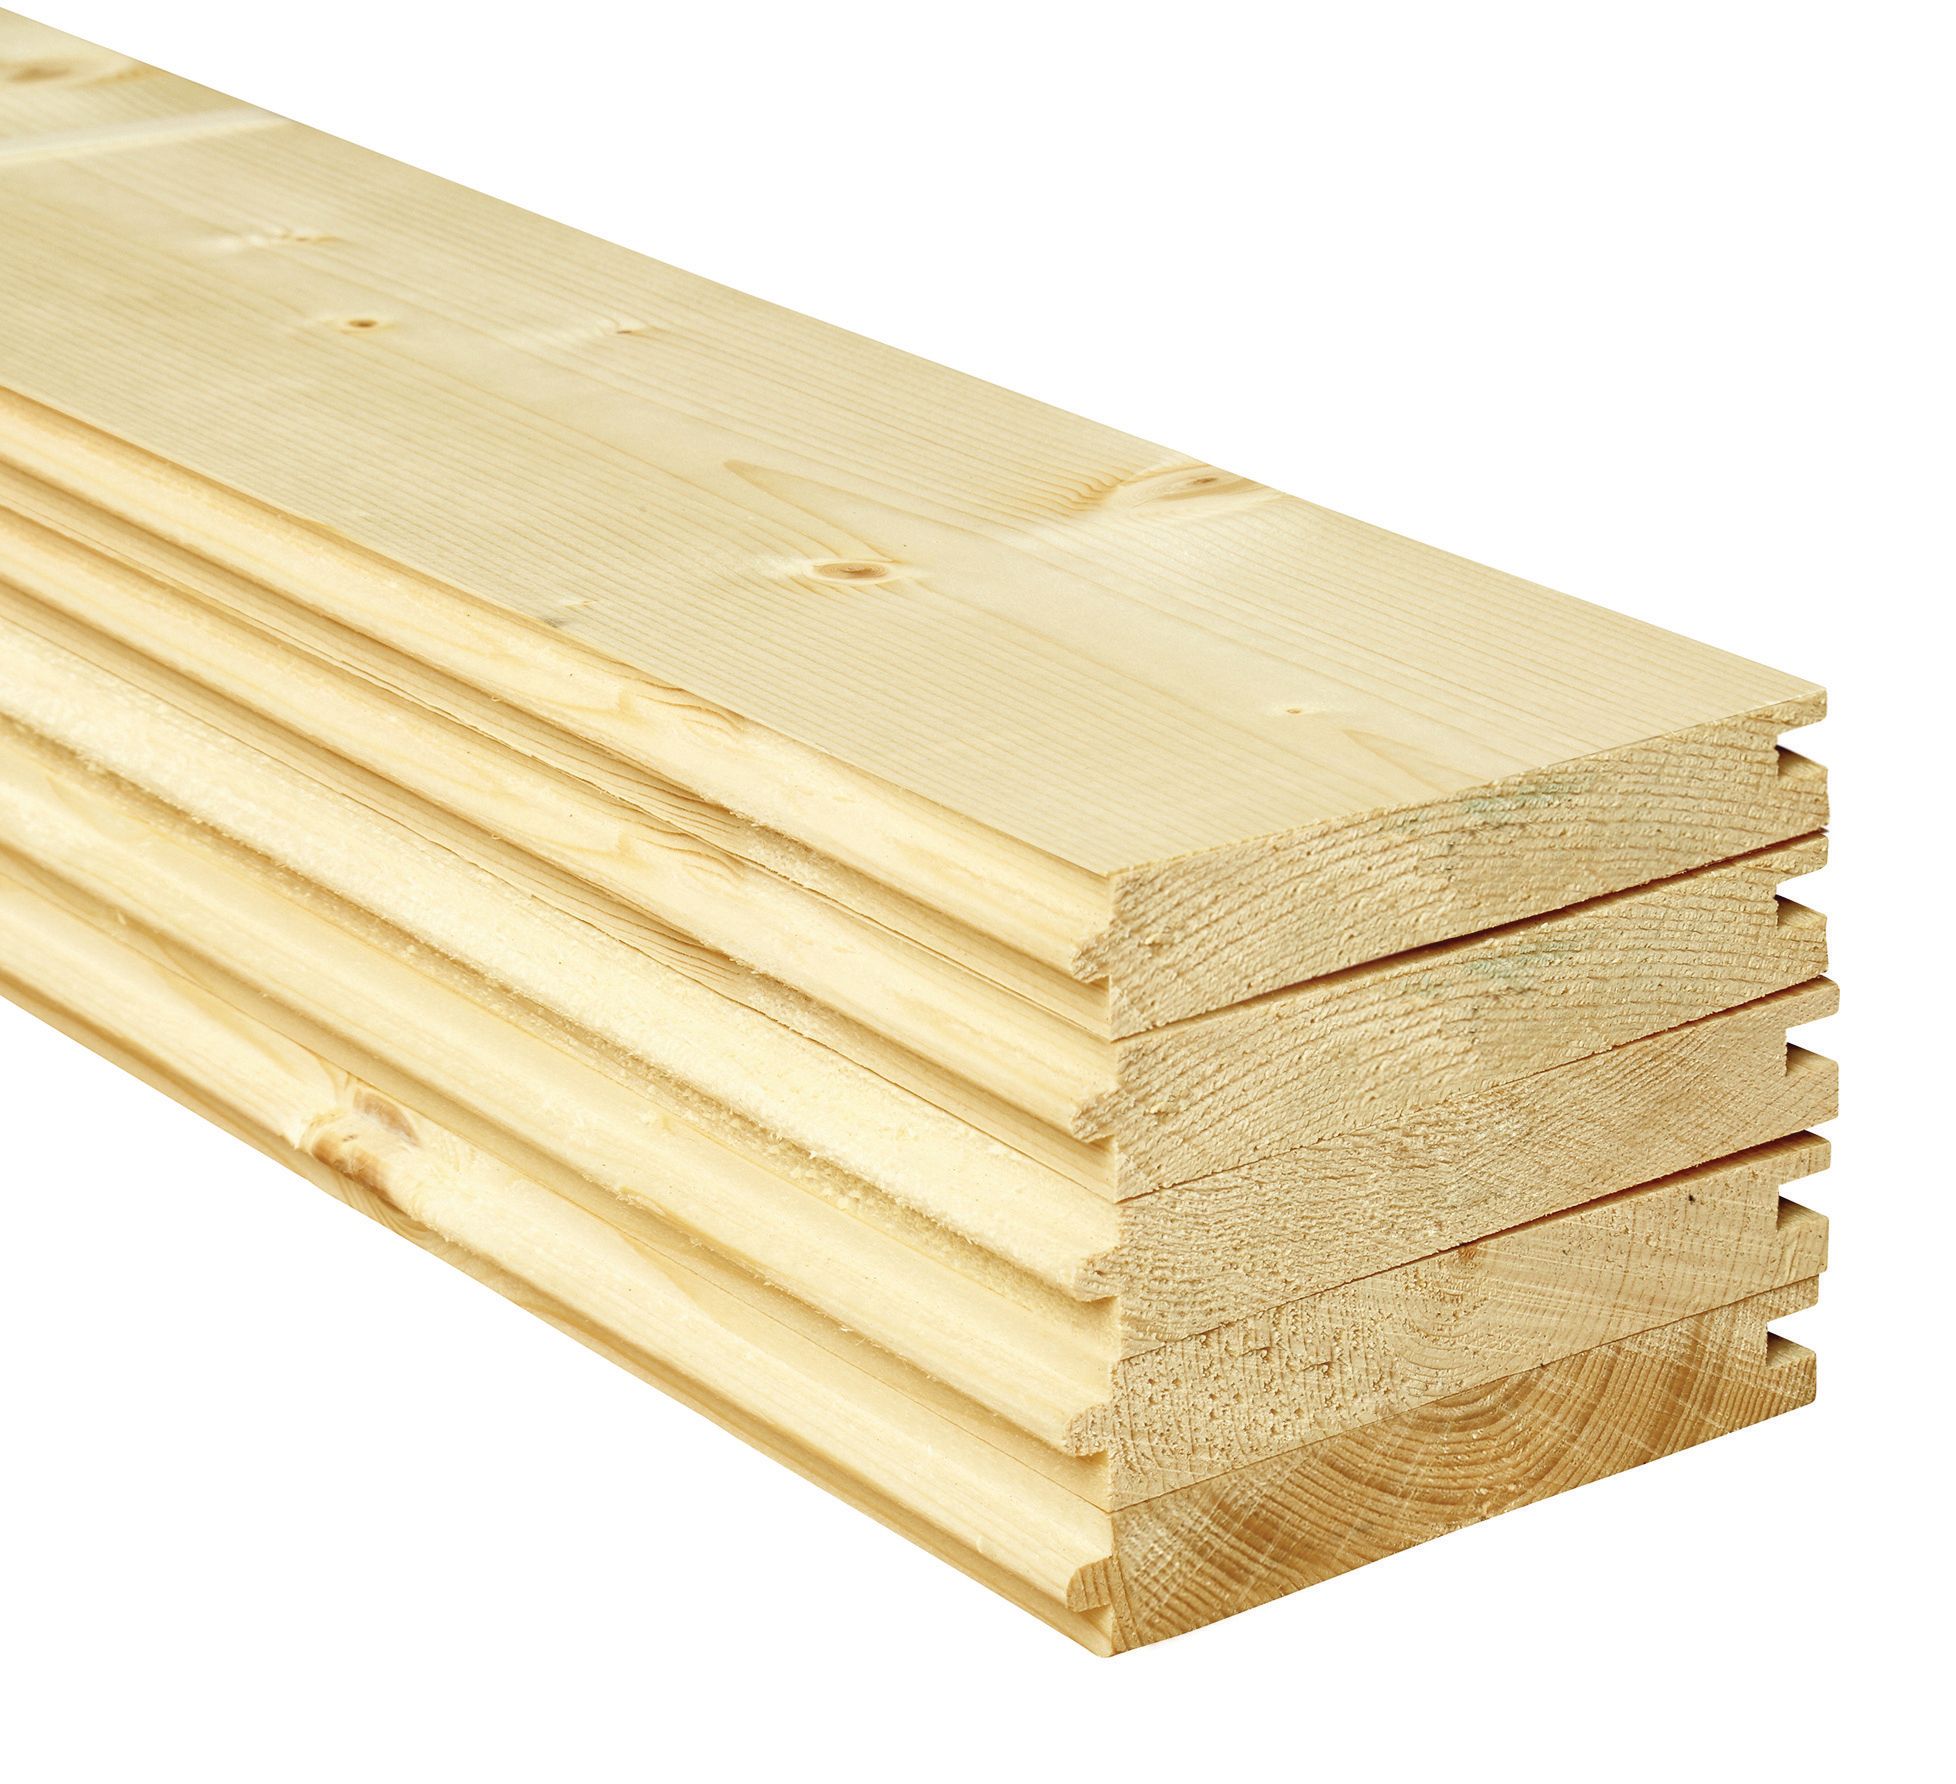 Image of Wickes PTG Timber Floorboards - 21mm x 137mm x 3000mm - Pack of 5